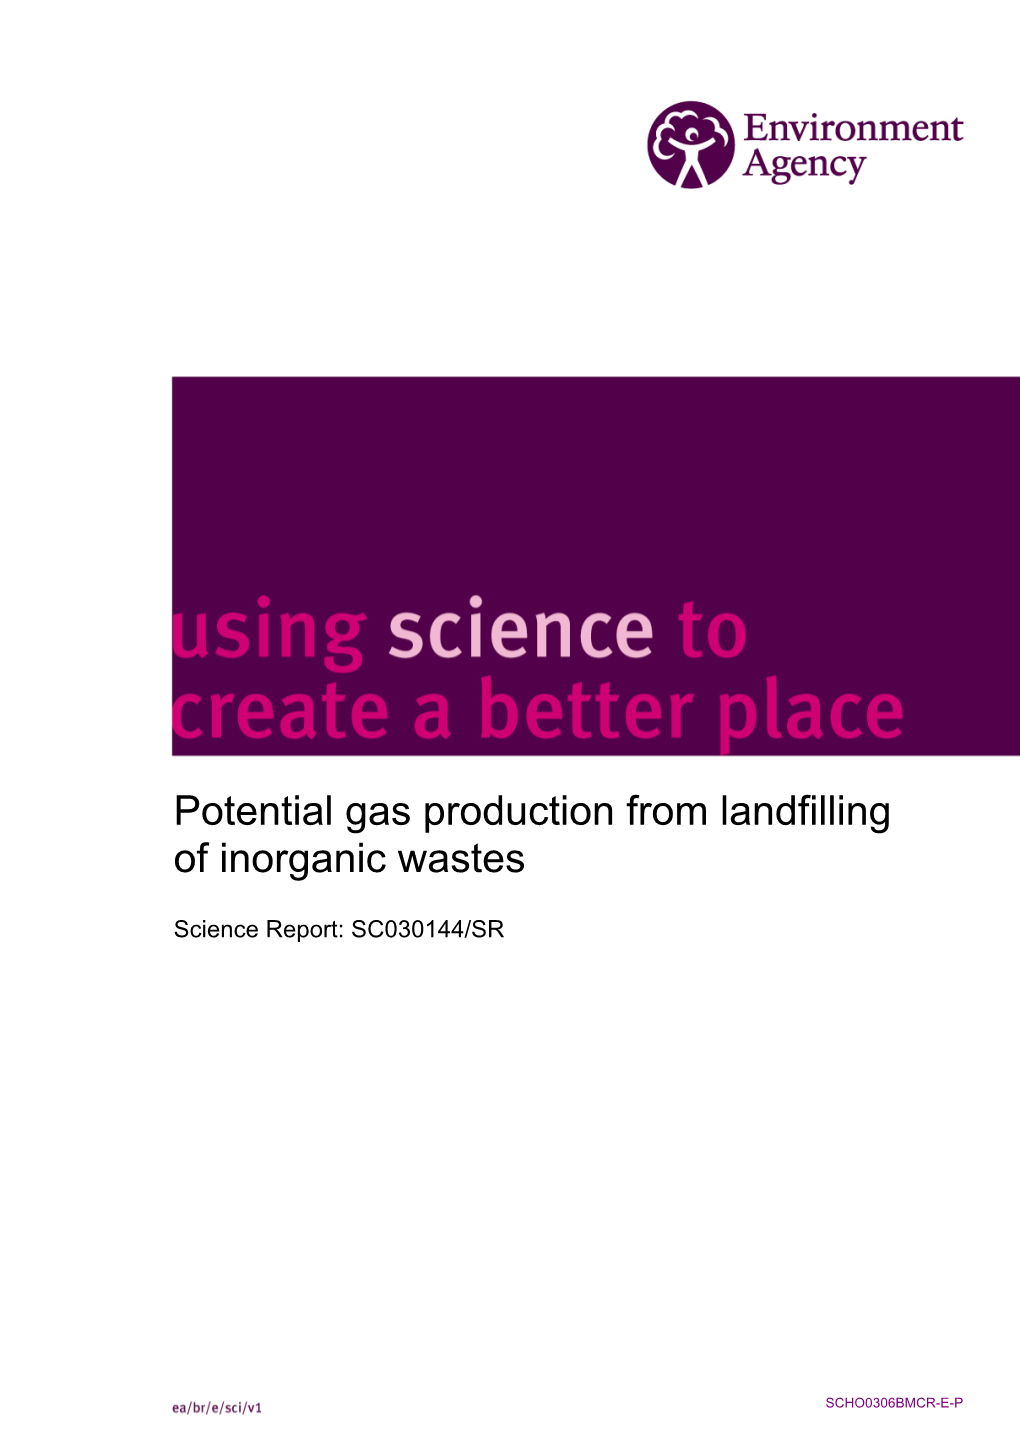 Potential Gas Production from Landfilling of Inorganic Wastes